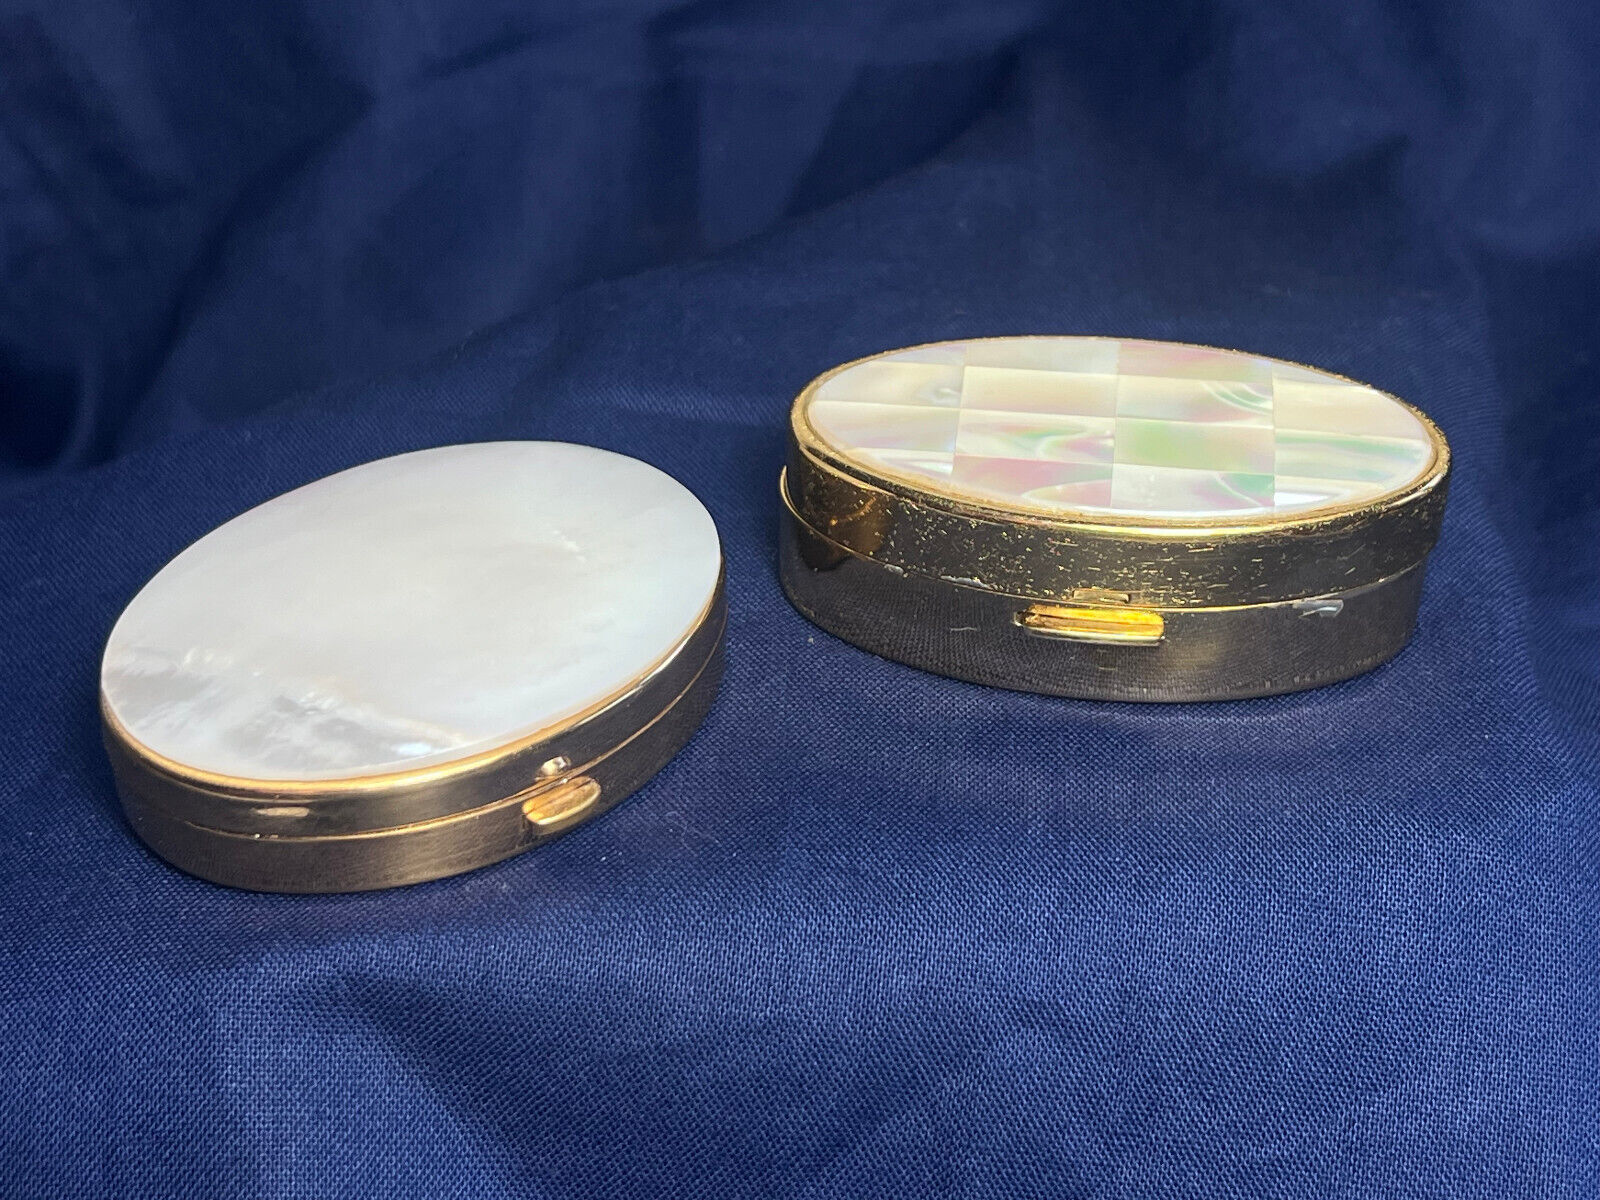 VTG Mother Of Pearl MOP Shell Design Brass Make-up Compact Mirror Max Factor - $29.65